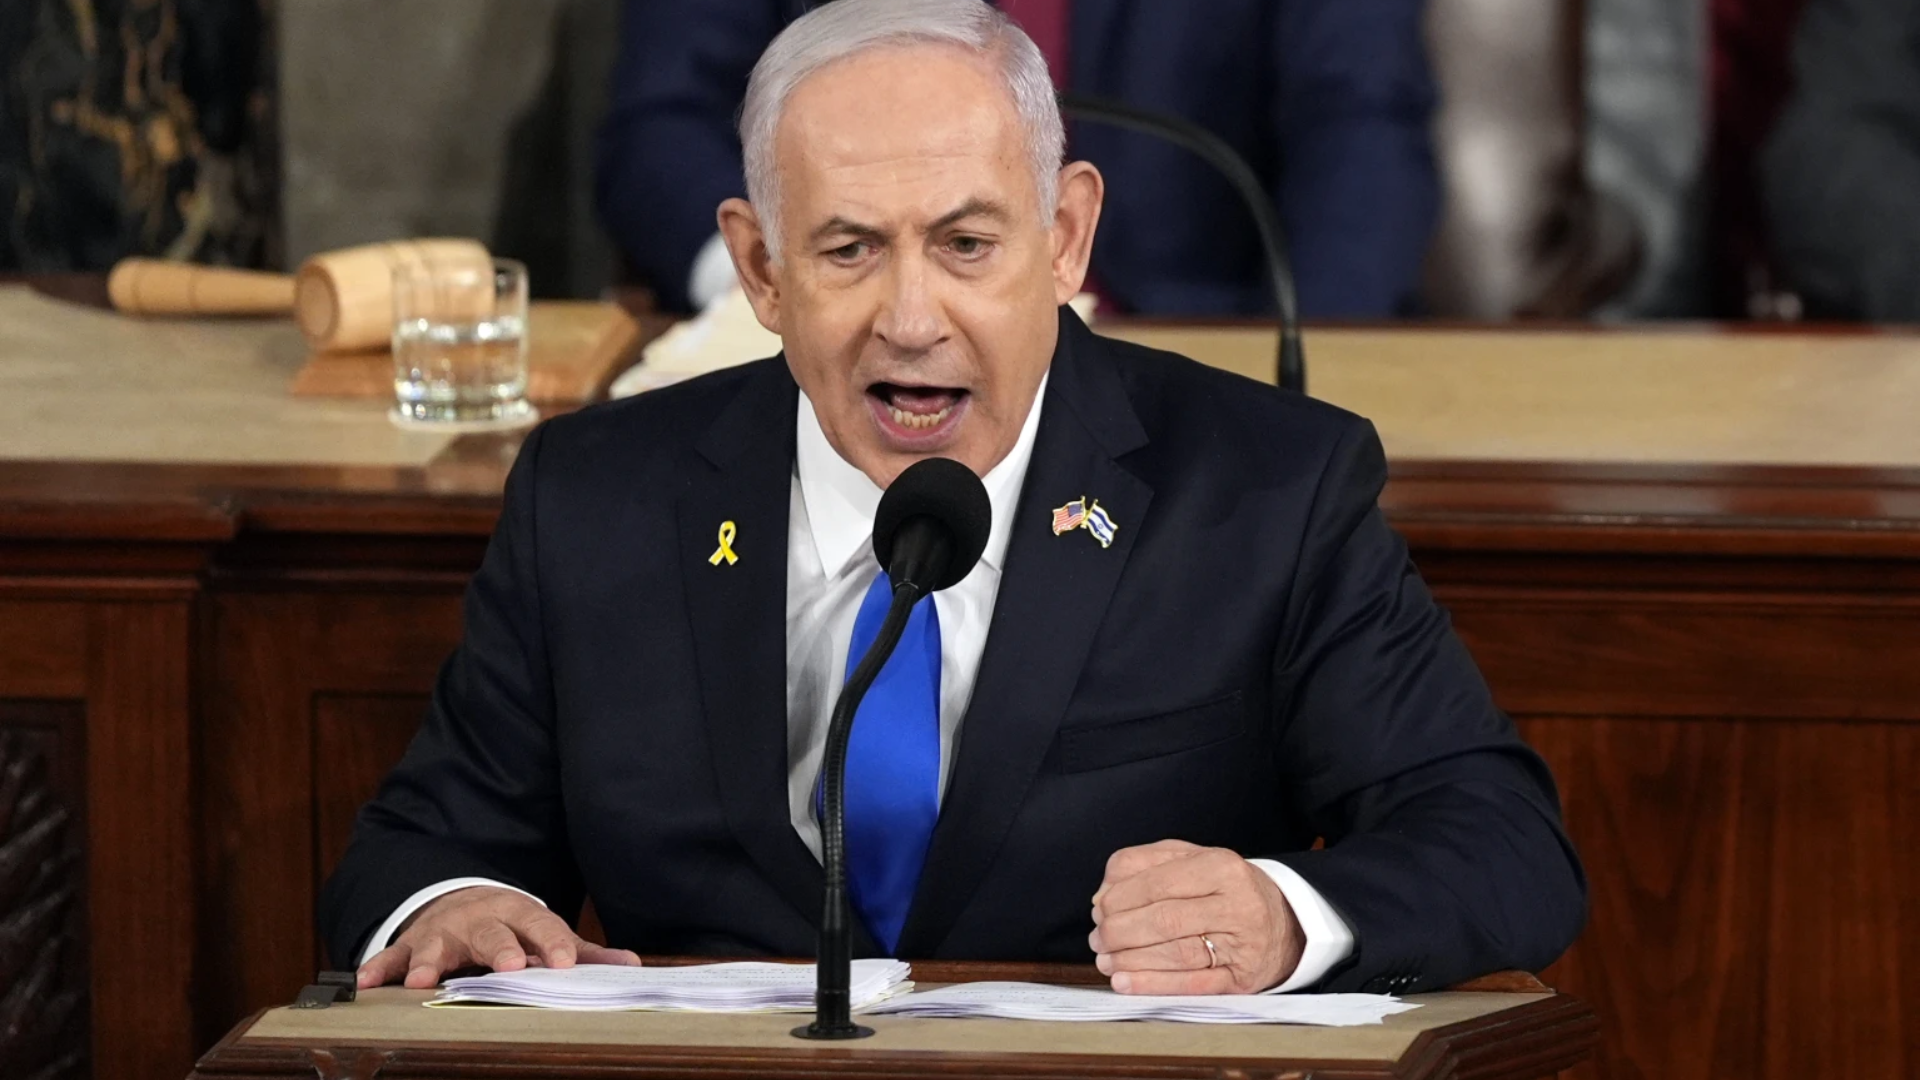 In fiery speech to Congress, Netanyahu vows ‘total victory’ in Gaza and denounces US protesters